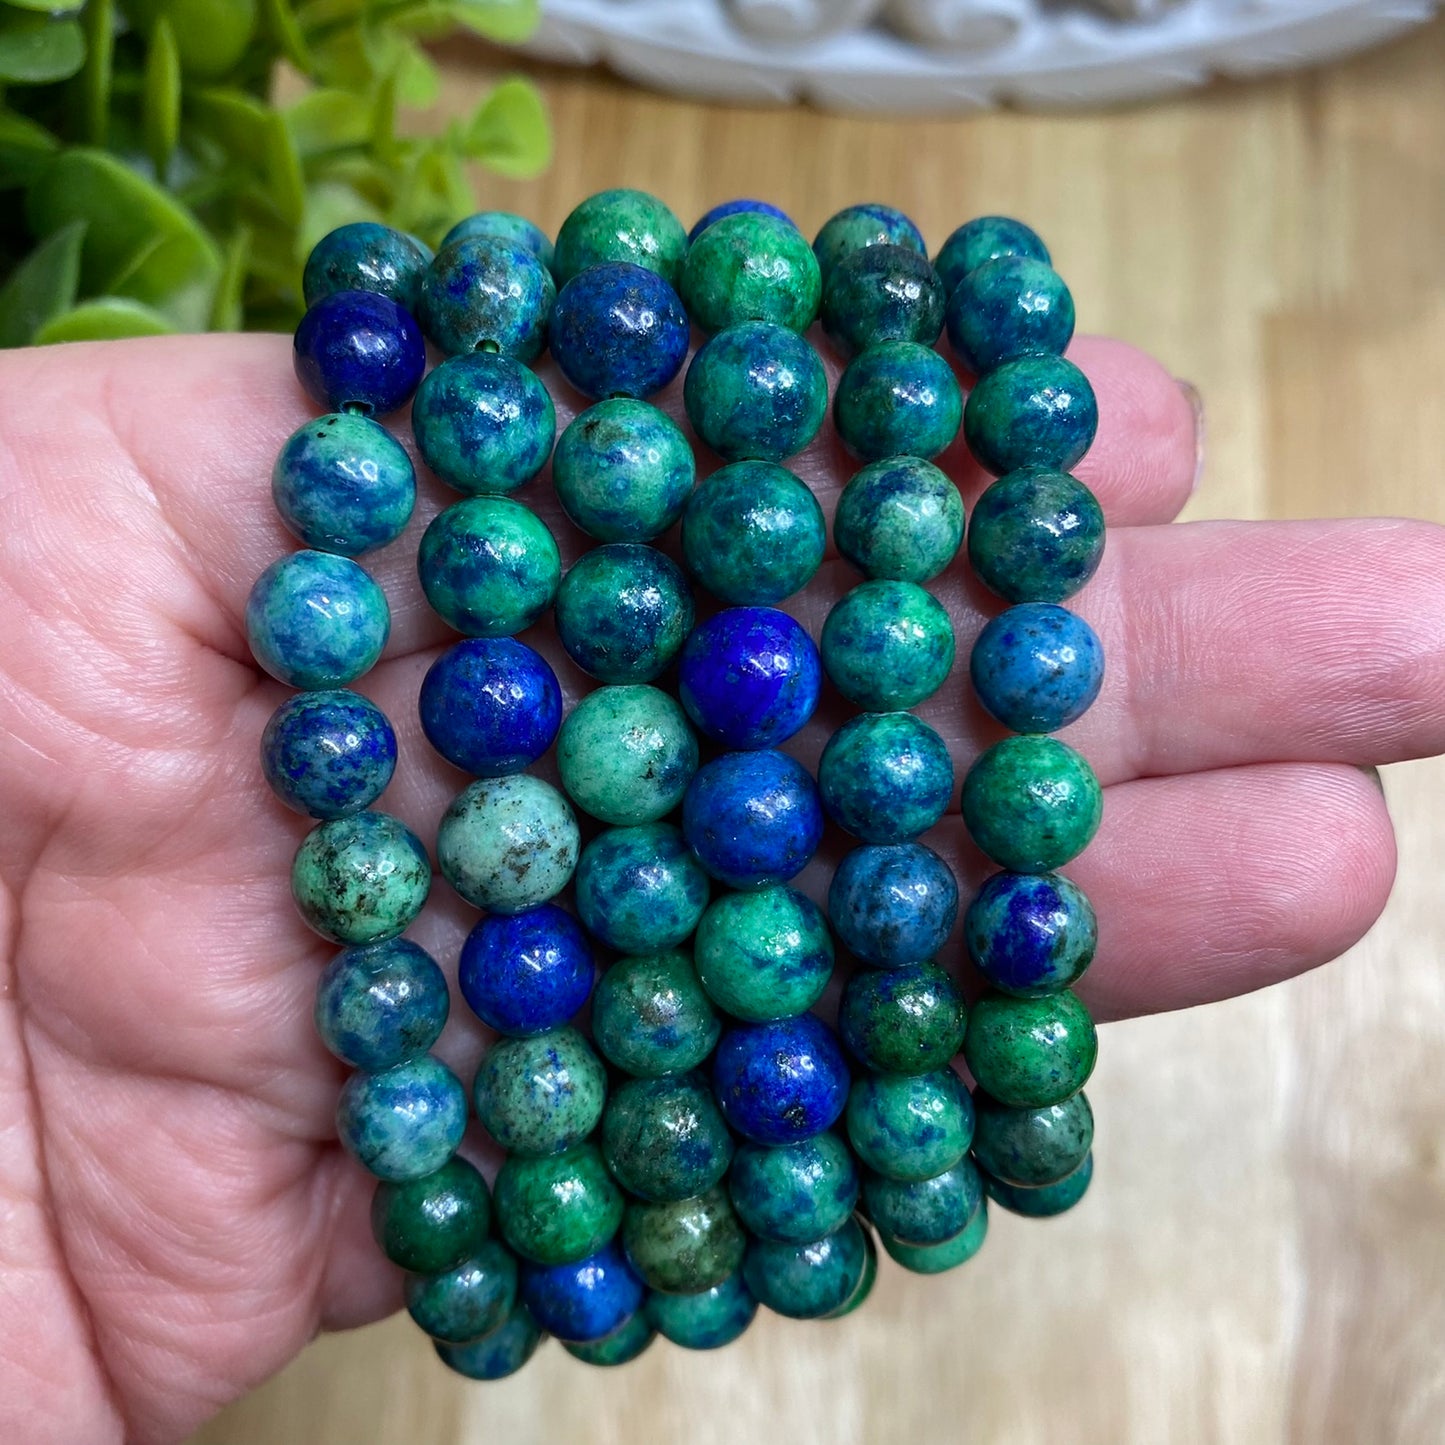 Azurite Bead Bracelet - Inspiration, Compassion and Intuition